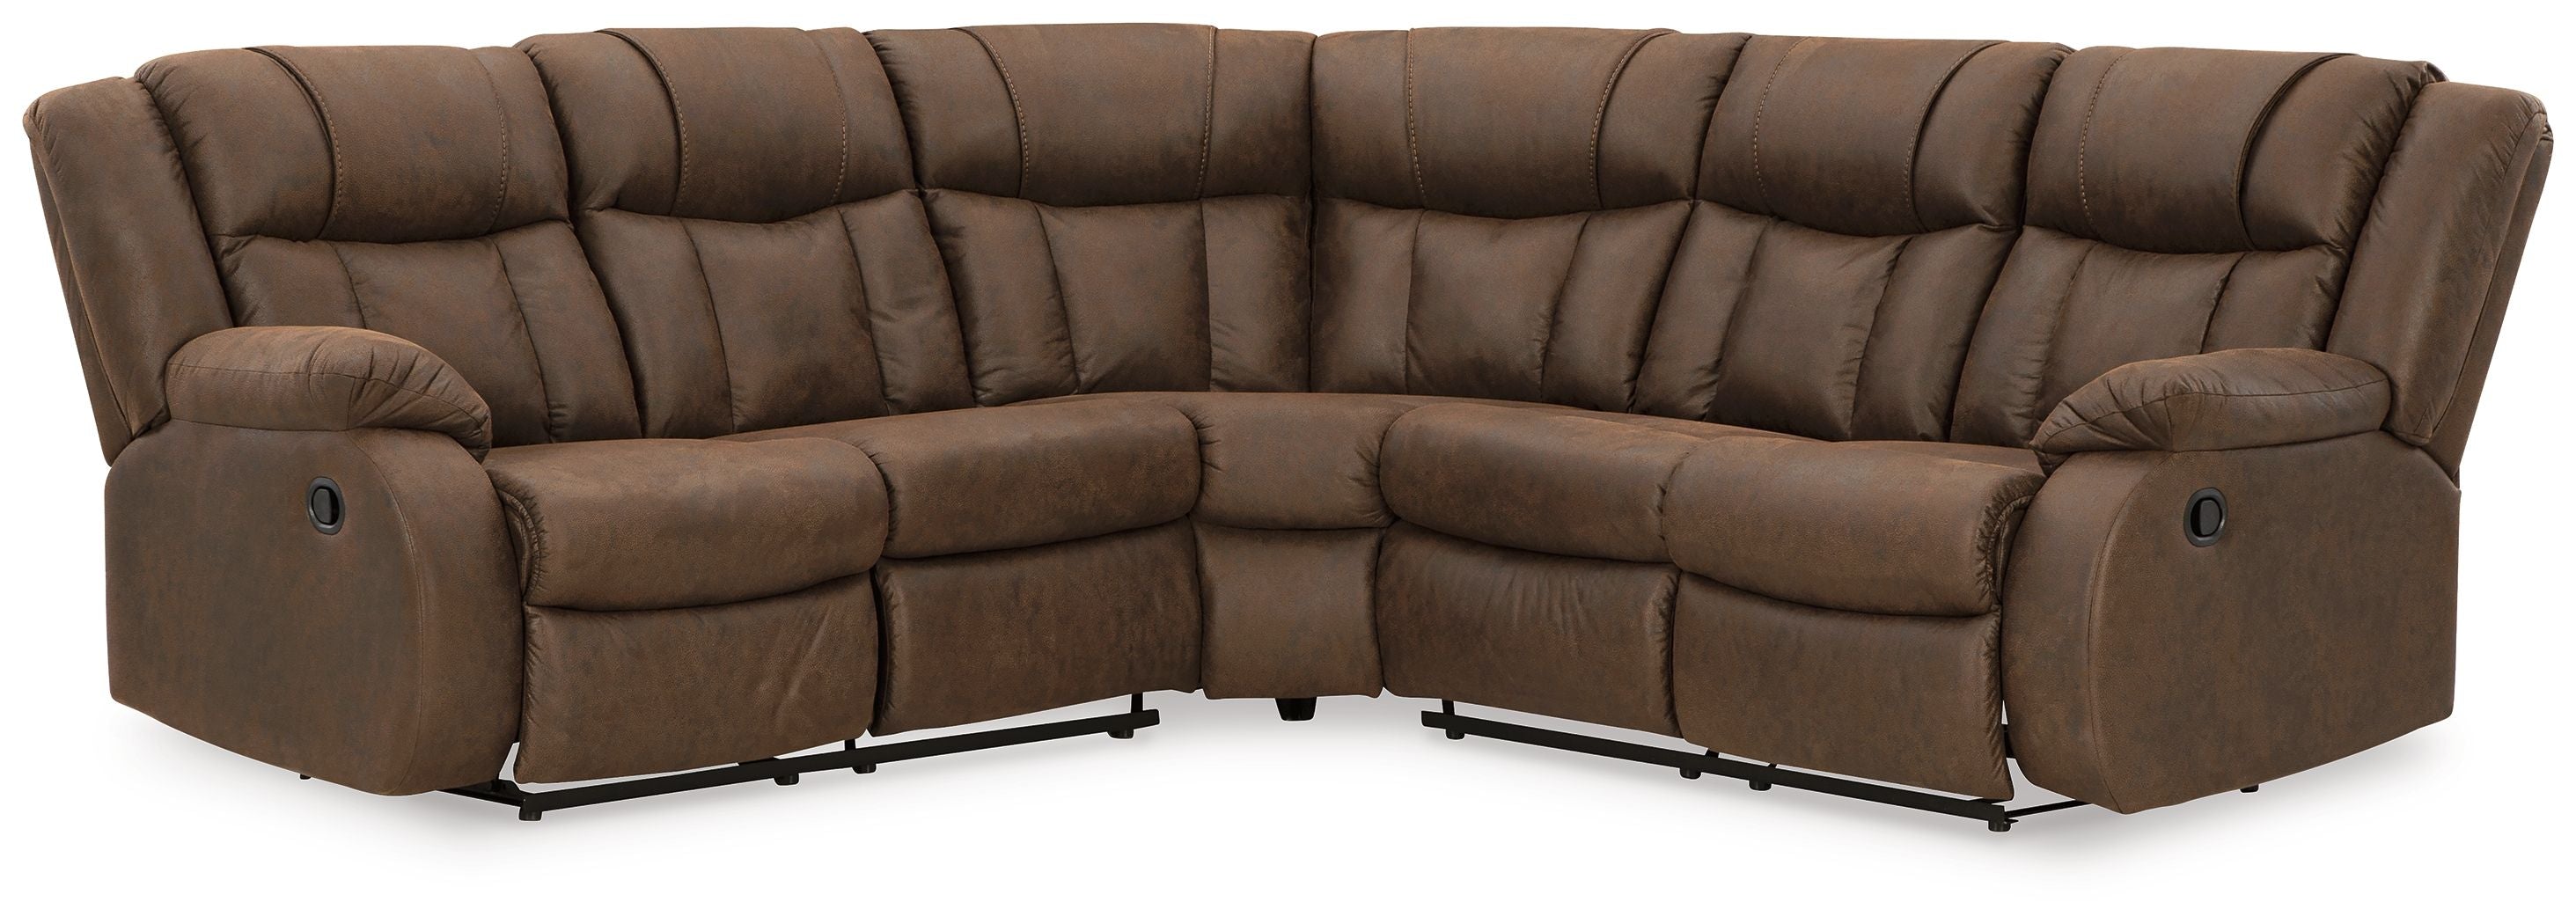 Trail Boys - Walnut - 2-Piece Reclining Sectional With Raf Reclining Loveseat - Faux Leather